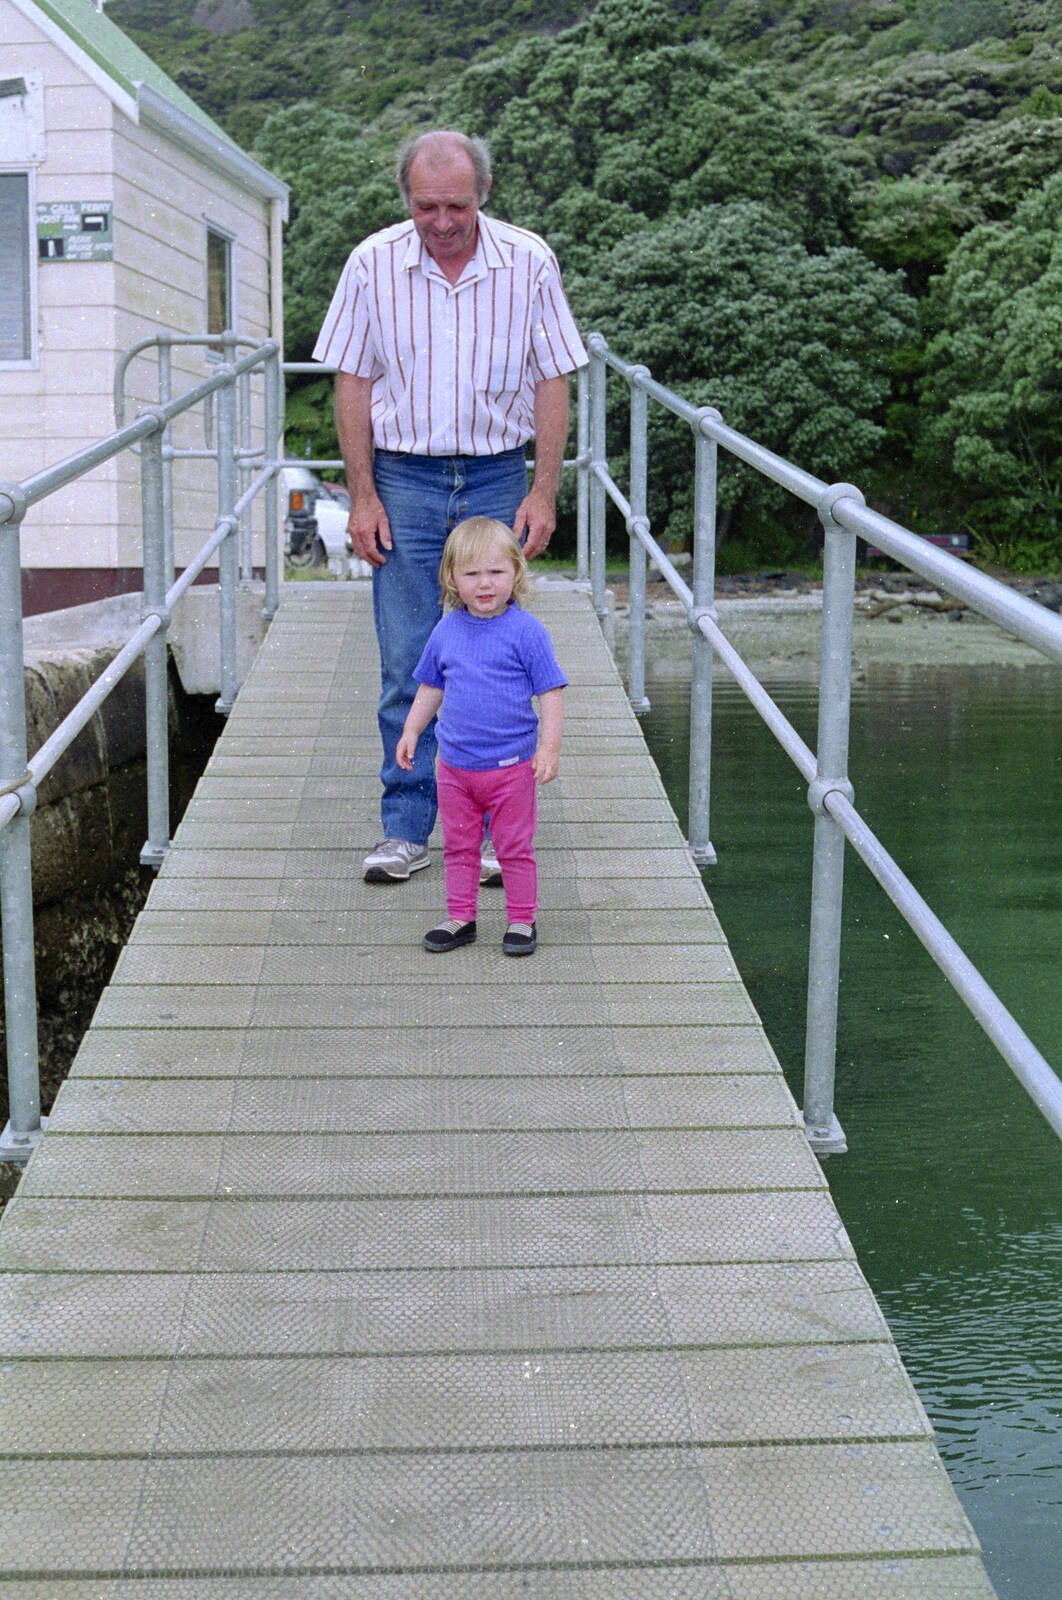 Clive and niece on the pier at Ferry Landing from Ferry Landing, Whitianga, New Zealand - 23rd November 1992